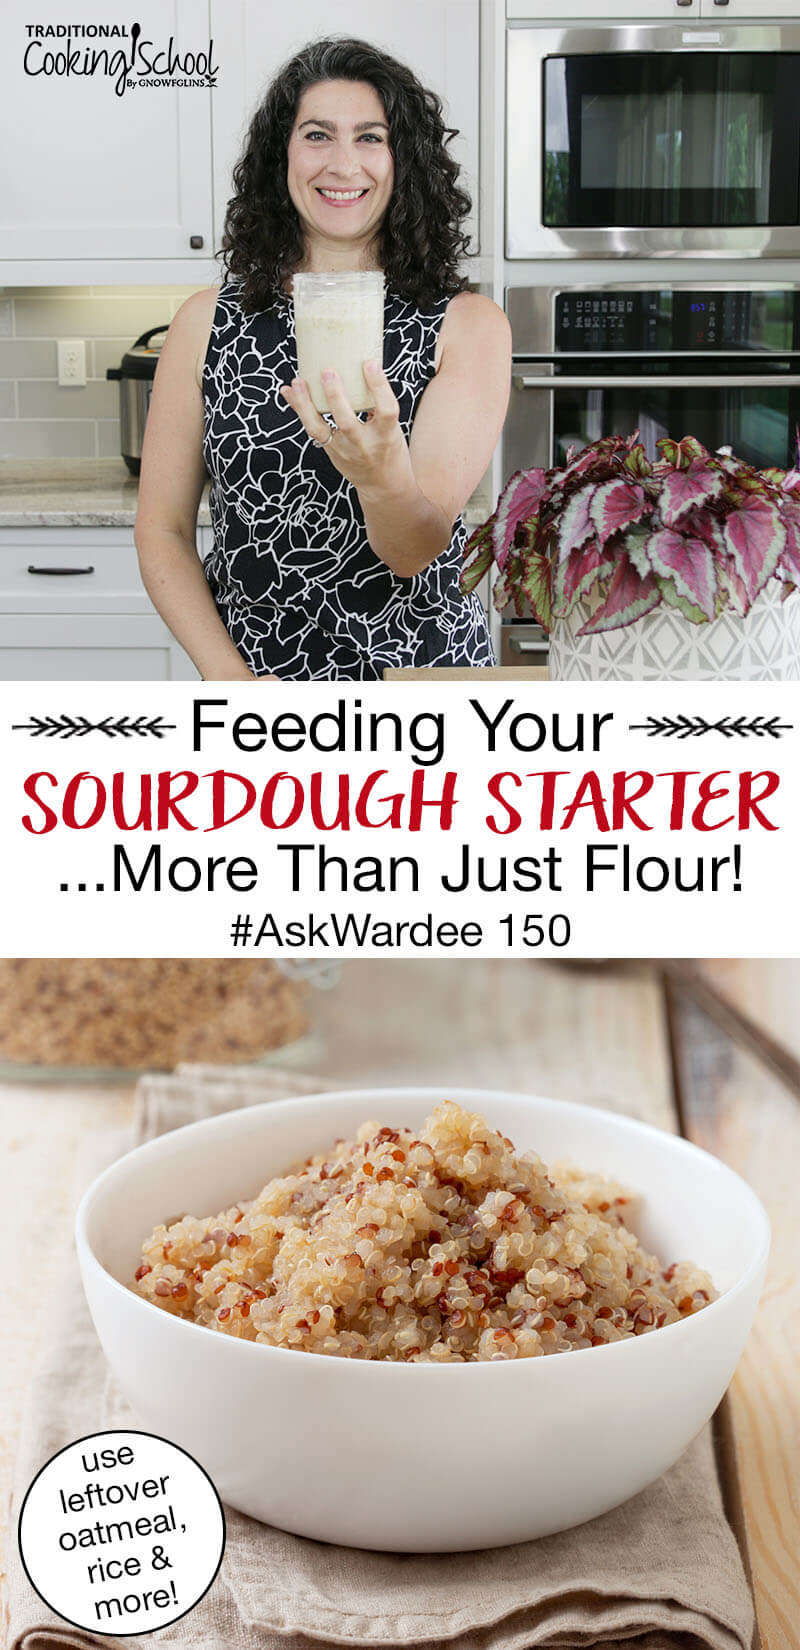 photo collage of white bowl of quinoa, and smiling woman in a kitchen holding out her small jar of sourdough starter with text overlay: "Feeding Your Sourdough Starter...More Than Just Flour! #AskWardee 150 (use leftover oatmeal, rice & more!)"